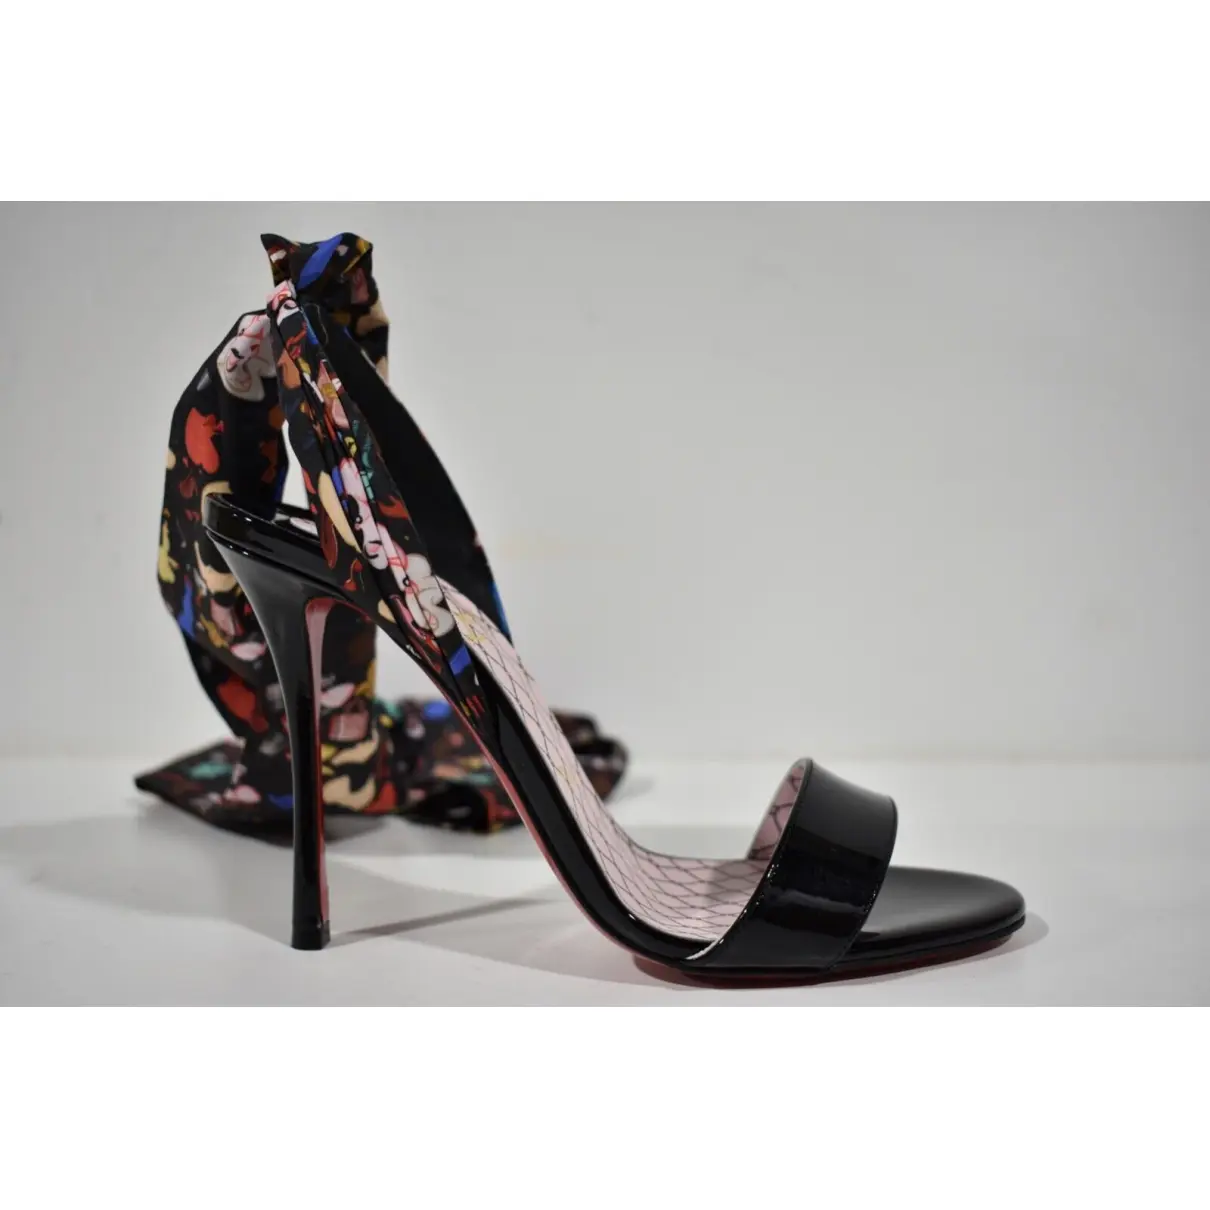 Patent leather sandals Christian Louboutin